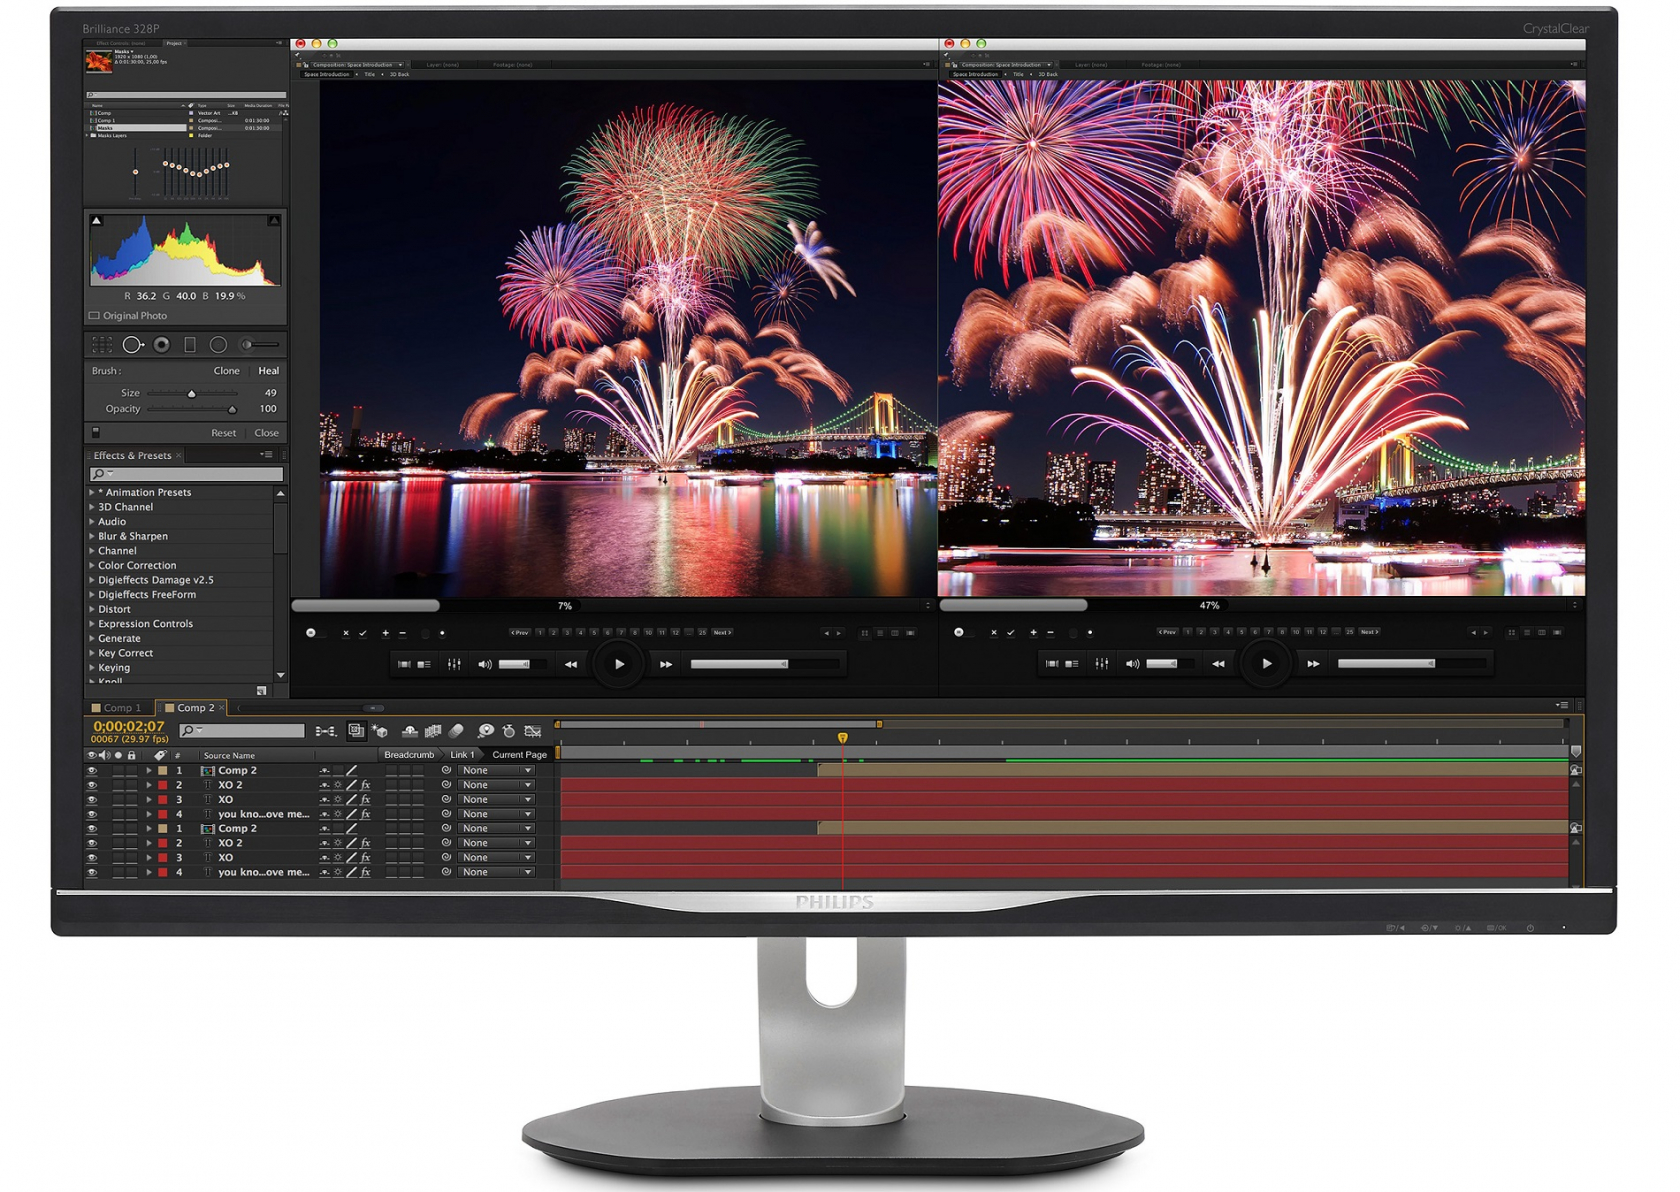 Philips' upcoming professional monitors feature USB-C and Gigabit Ethernet connectivity